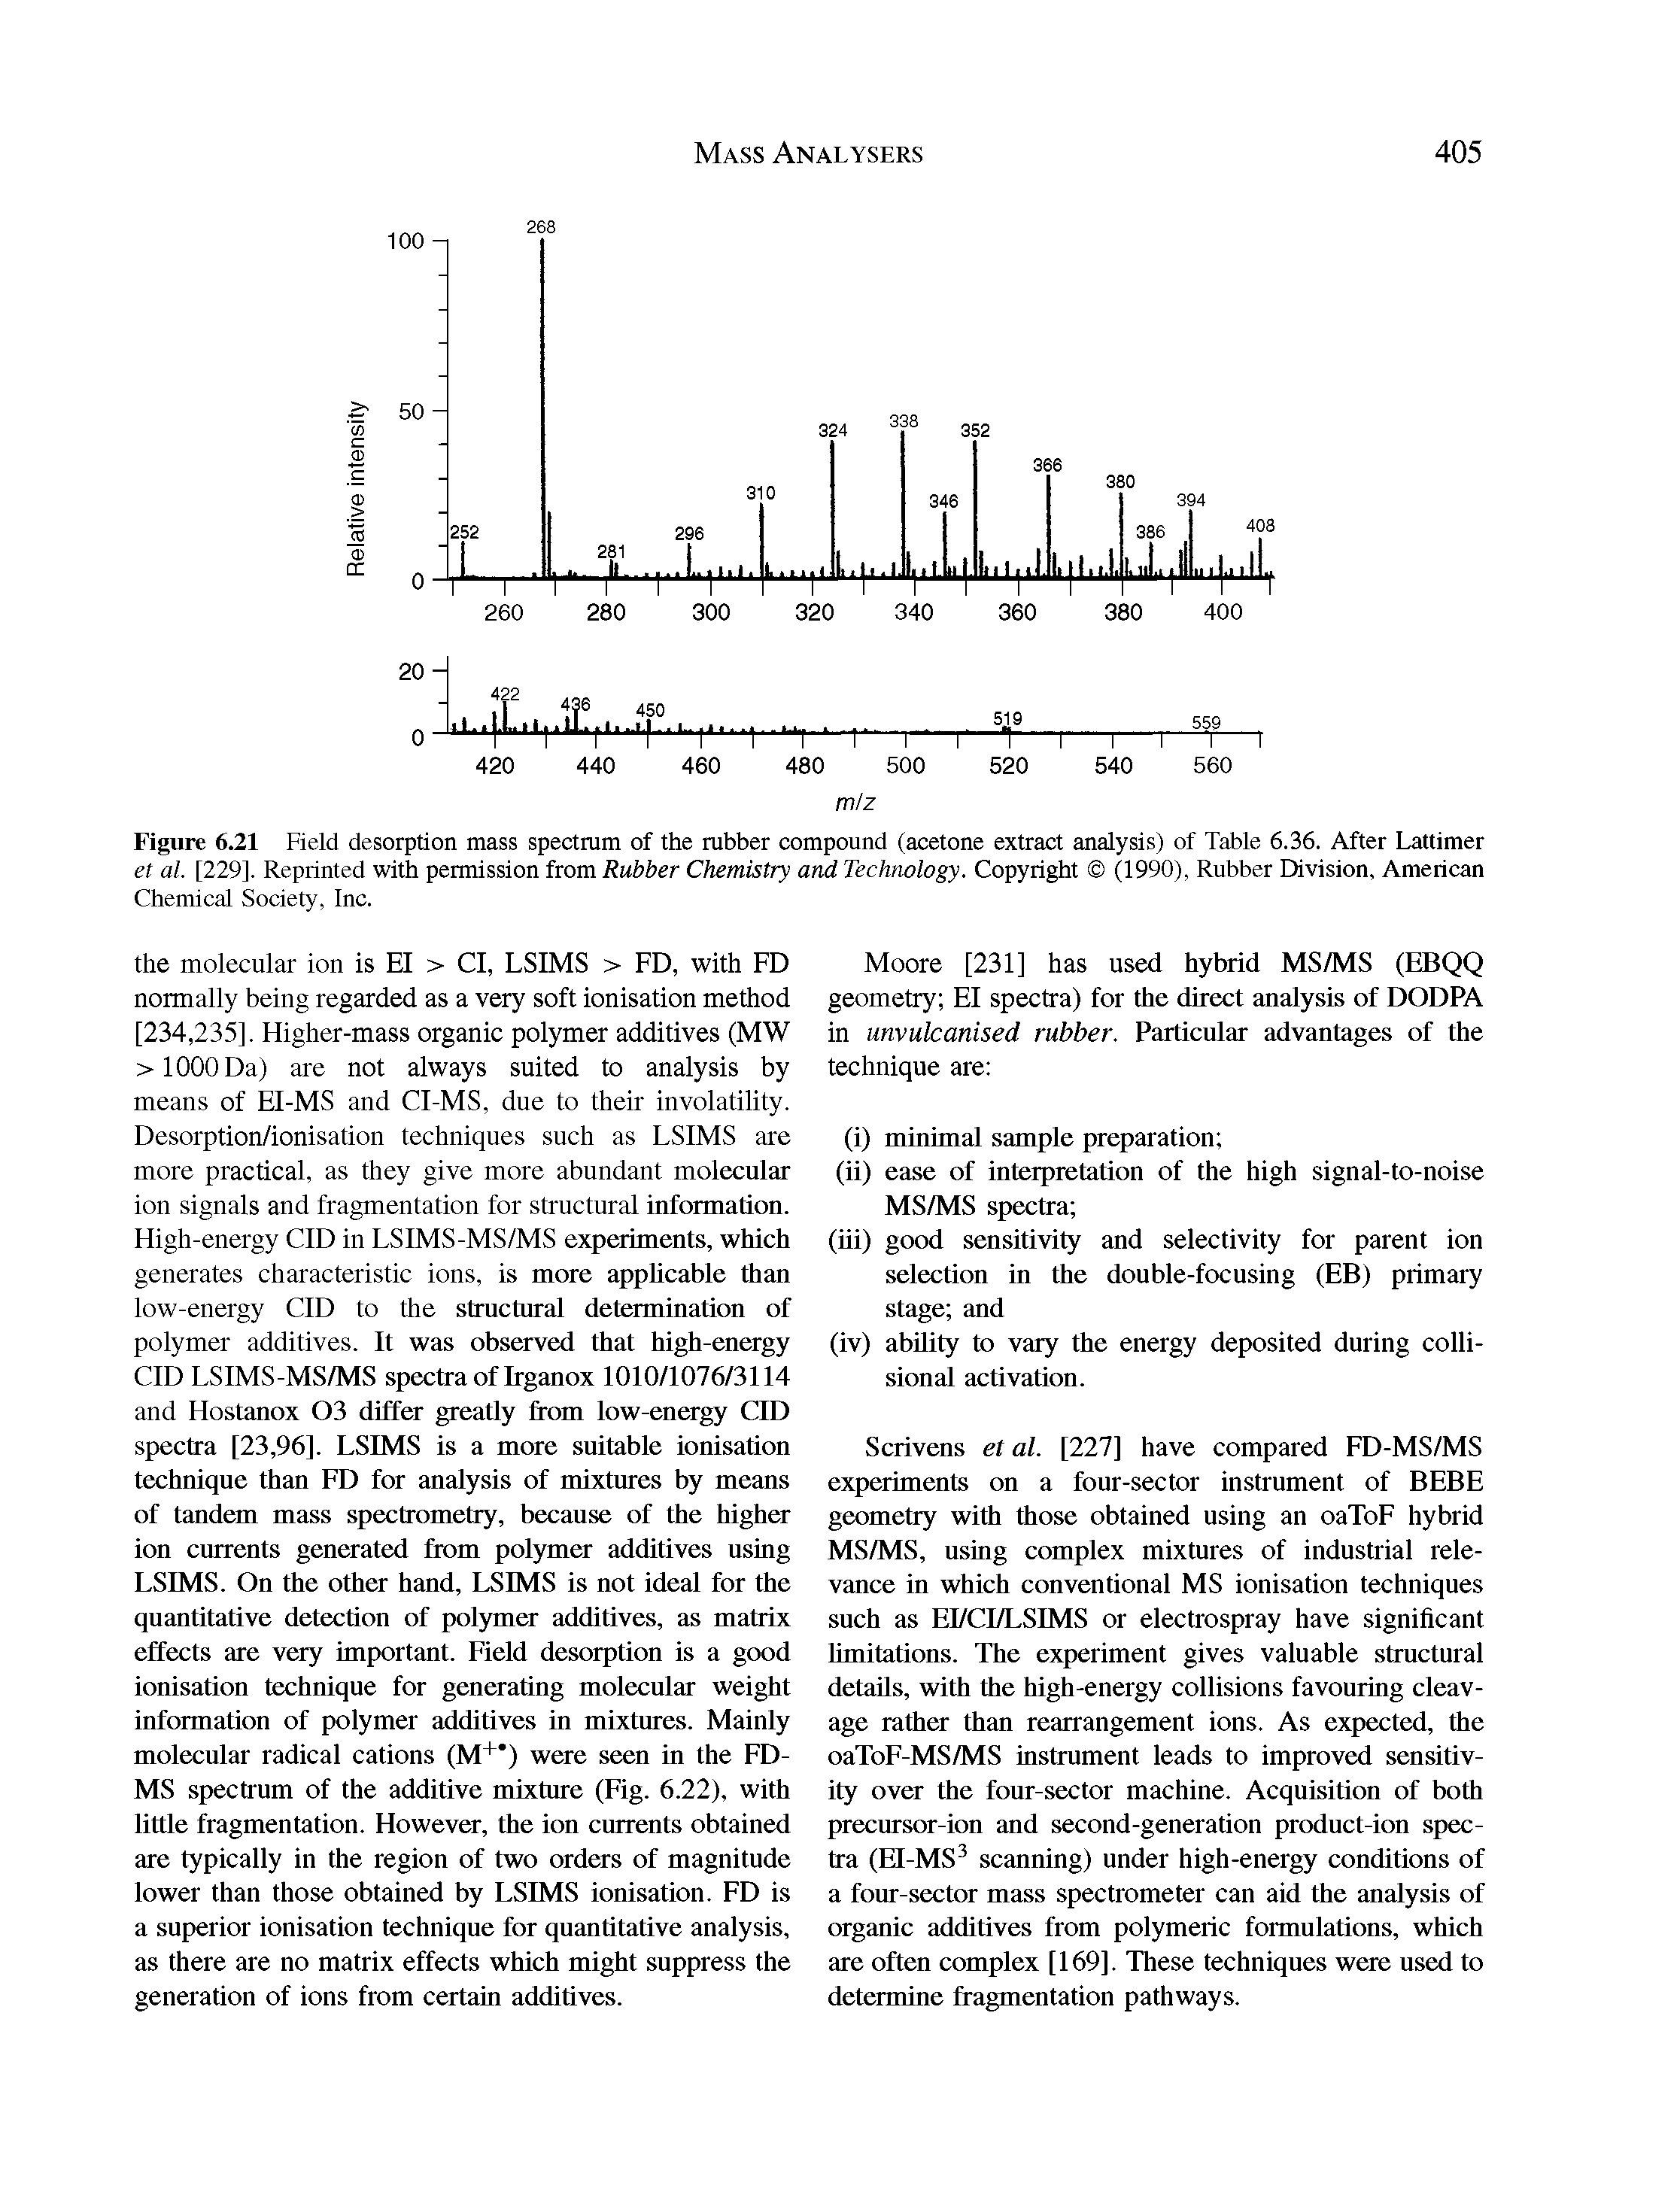 Figure 6.21 Field desorption mass spectrum of the rubber compound (acetone extract analysis) of Table 6.36. After Lattimer et al. [229]. Reprinted with permission from Rubber Chemistry and Technology. Copyright (1990), Rubber Division, American Chemical Society, Inc.